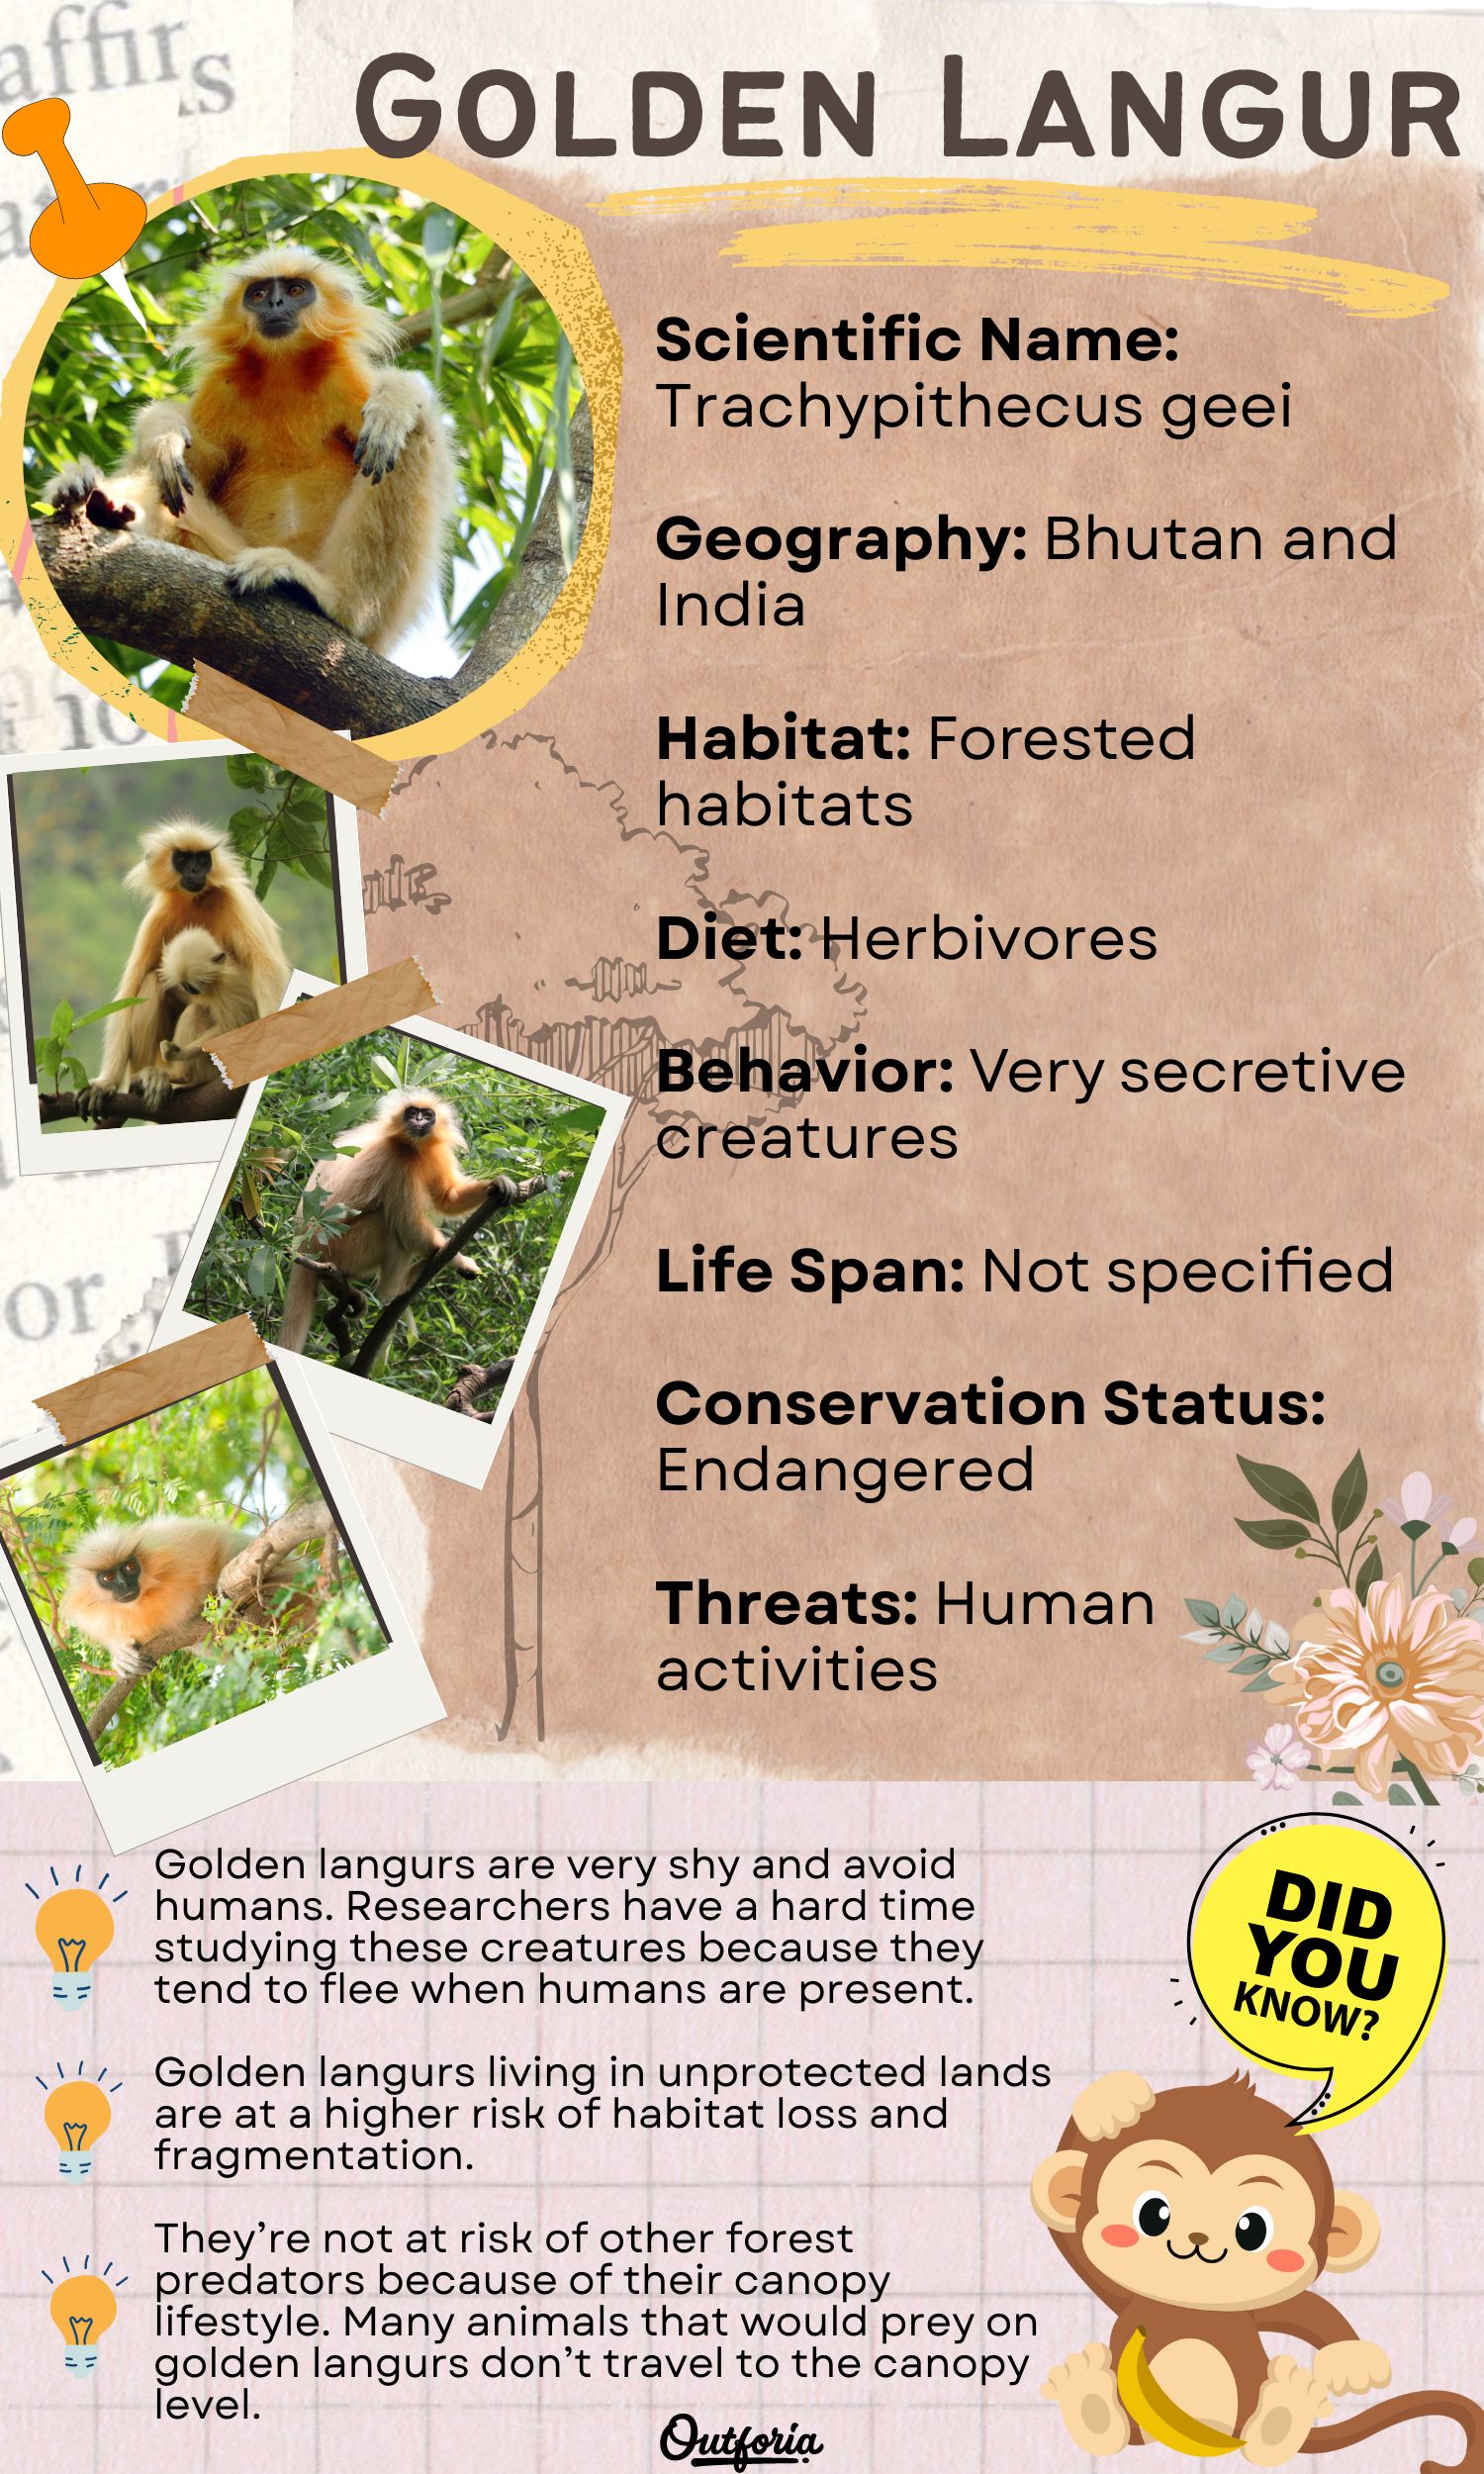 Chart about golden langur complete with facts, pictures, and more